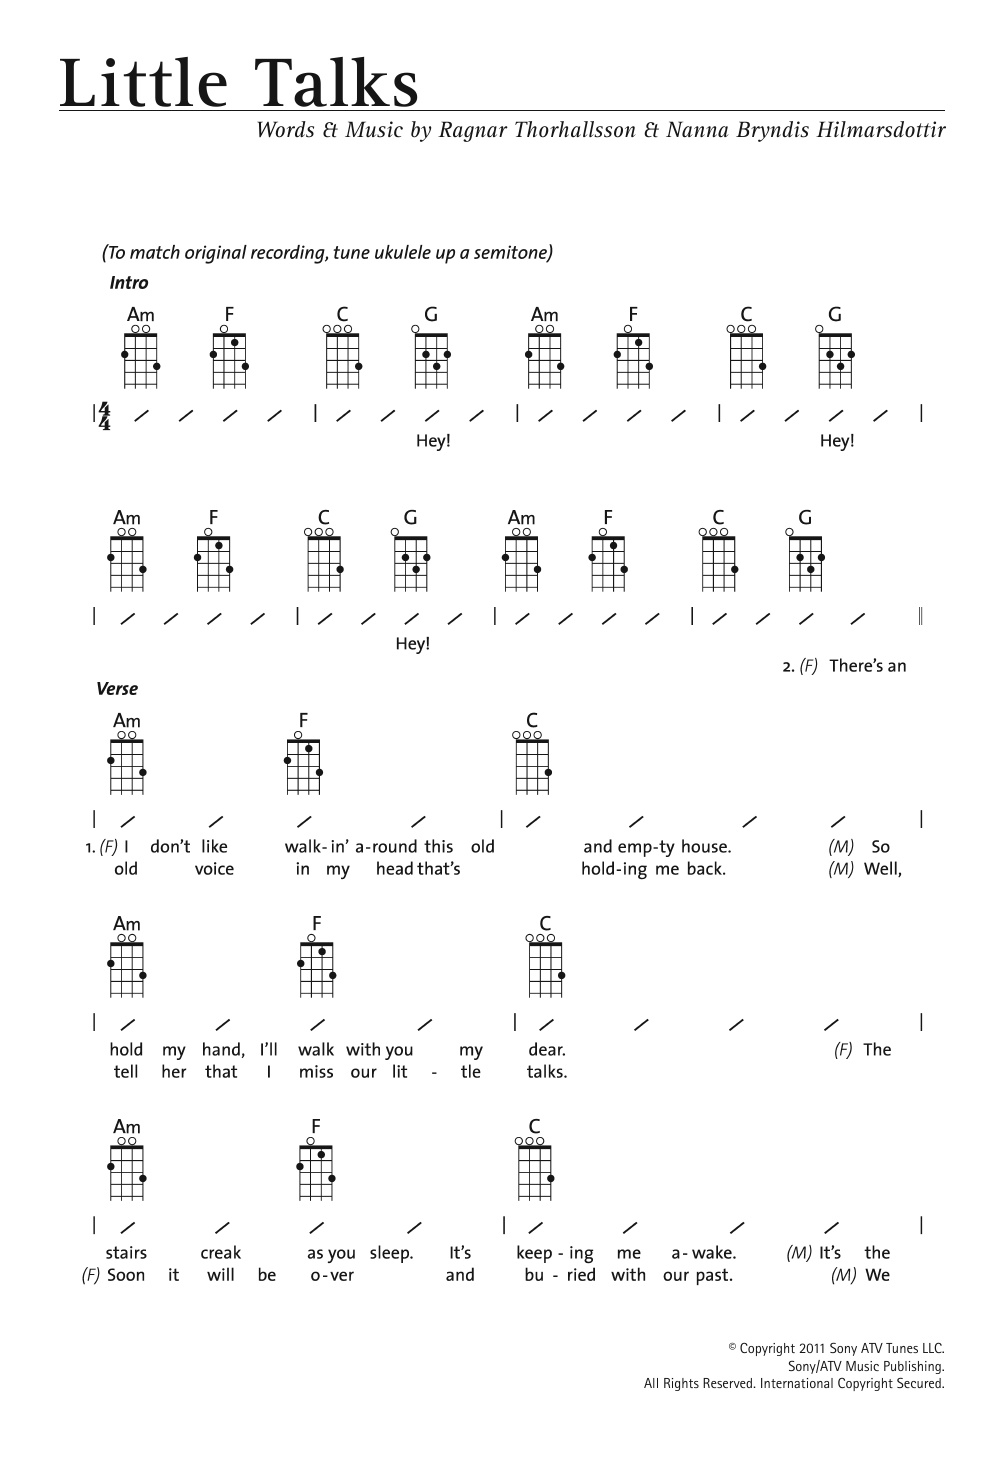 Dirty Paws Chords Sheet Music Digital Files To Print Licensed Of Monsters And Men